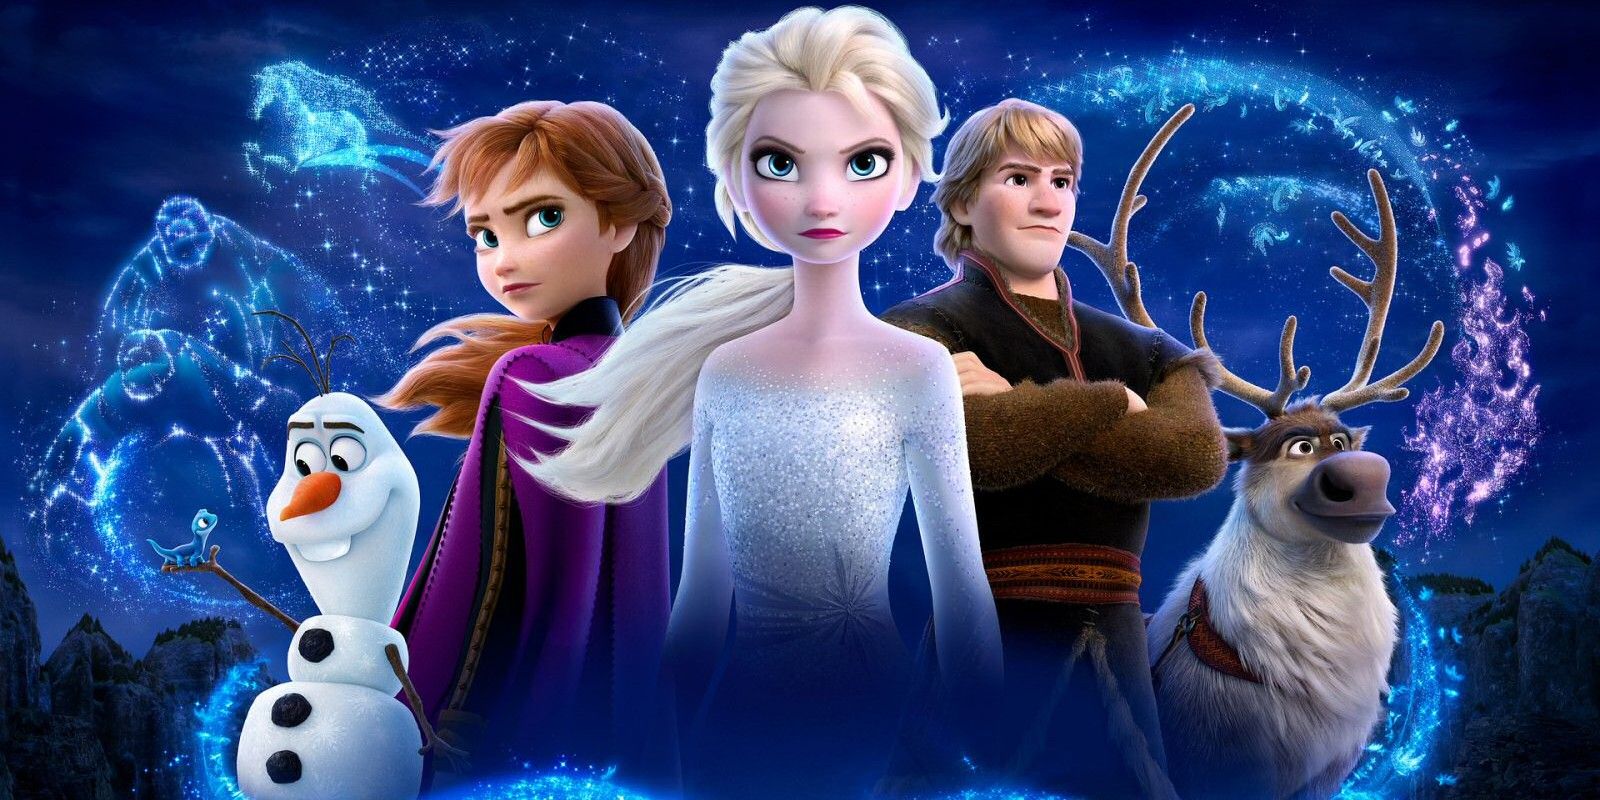 Why Frozen 2 Is NOT Available On Disney+ UK Yet